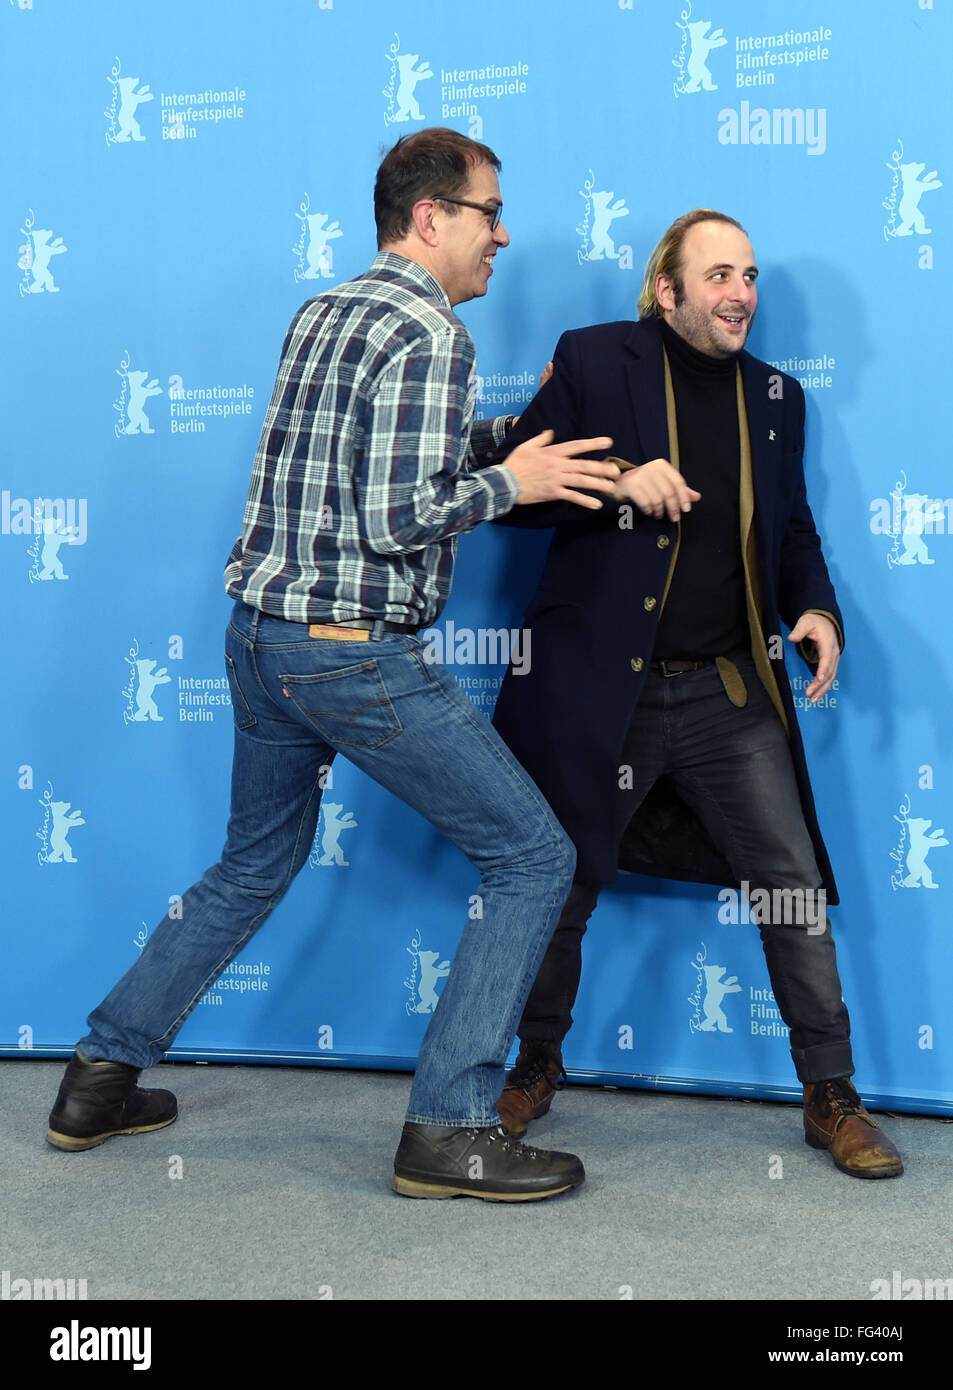 Berlin, Germany. 17th Feb, 2016. 66th International Film Festival in Berlin, Germany, 17 February 2016. Photo call 'Des nouvelles de la planete Mars' ('News from planet Mars': Director Dominik Moll (L-R) and actor Vincent Macaigne. The film is shown in the Berlinale Competition (Out of Competition). The Berlinale runs from 11 February to 21 February 2016. Photo: Jens Kalaene/dpa/Alamy Live News Stock Photo